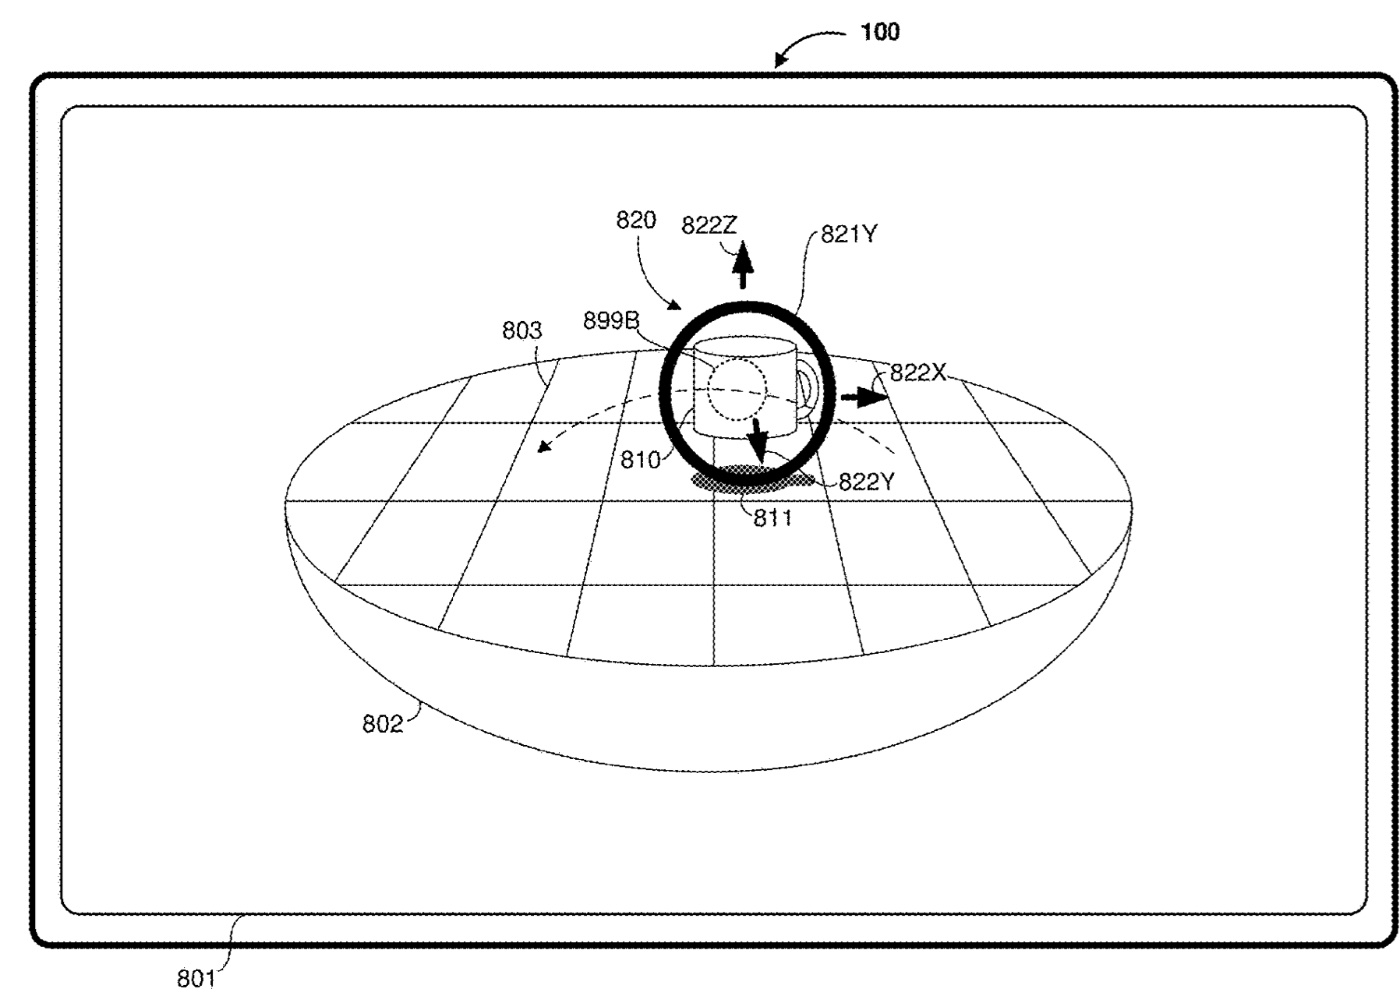 photo of Apple patent involves manipulating 3D objects on a 2D screen image